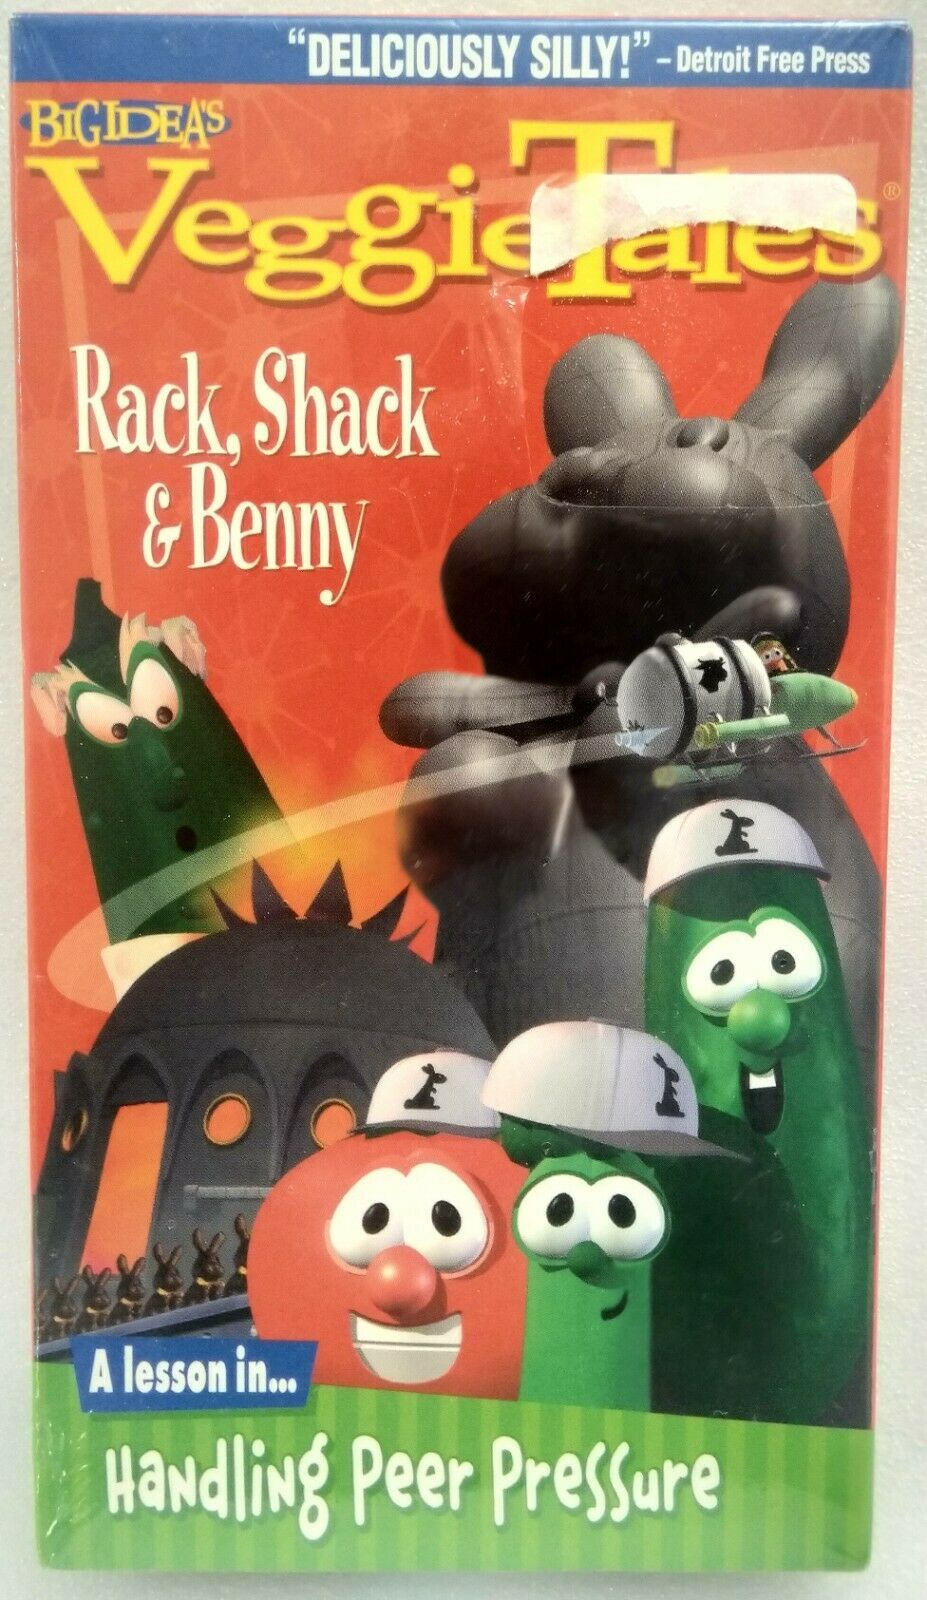 VHS VeggieTales - Rack, Shack, and Benny and 50 similar items